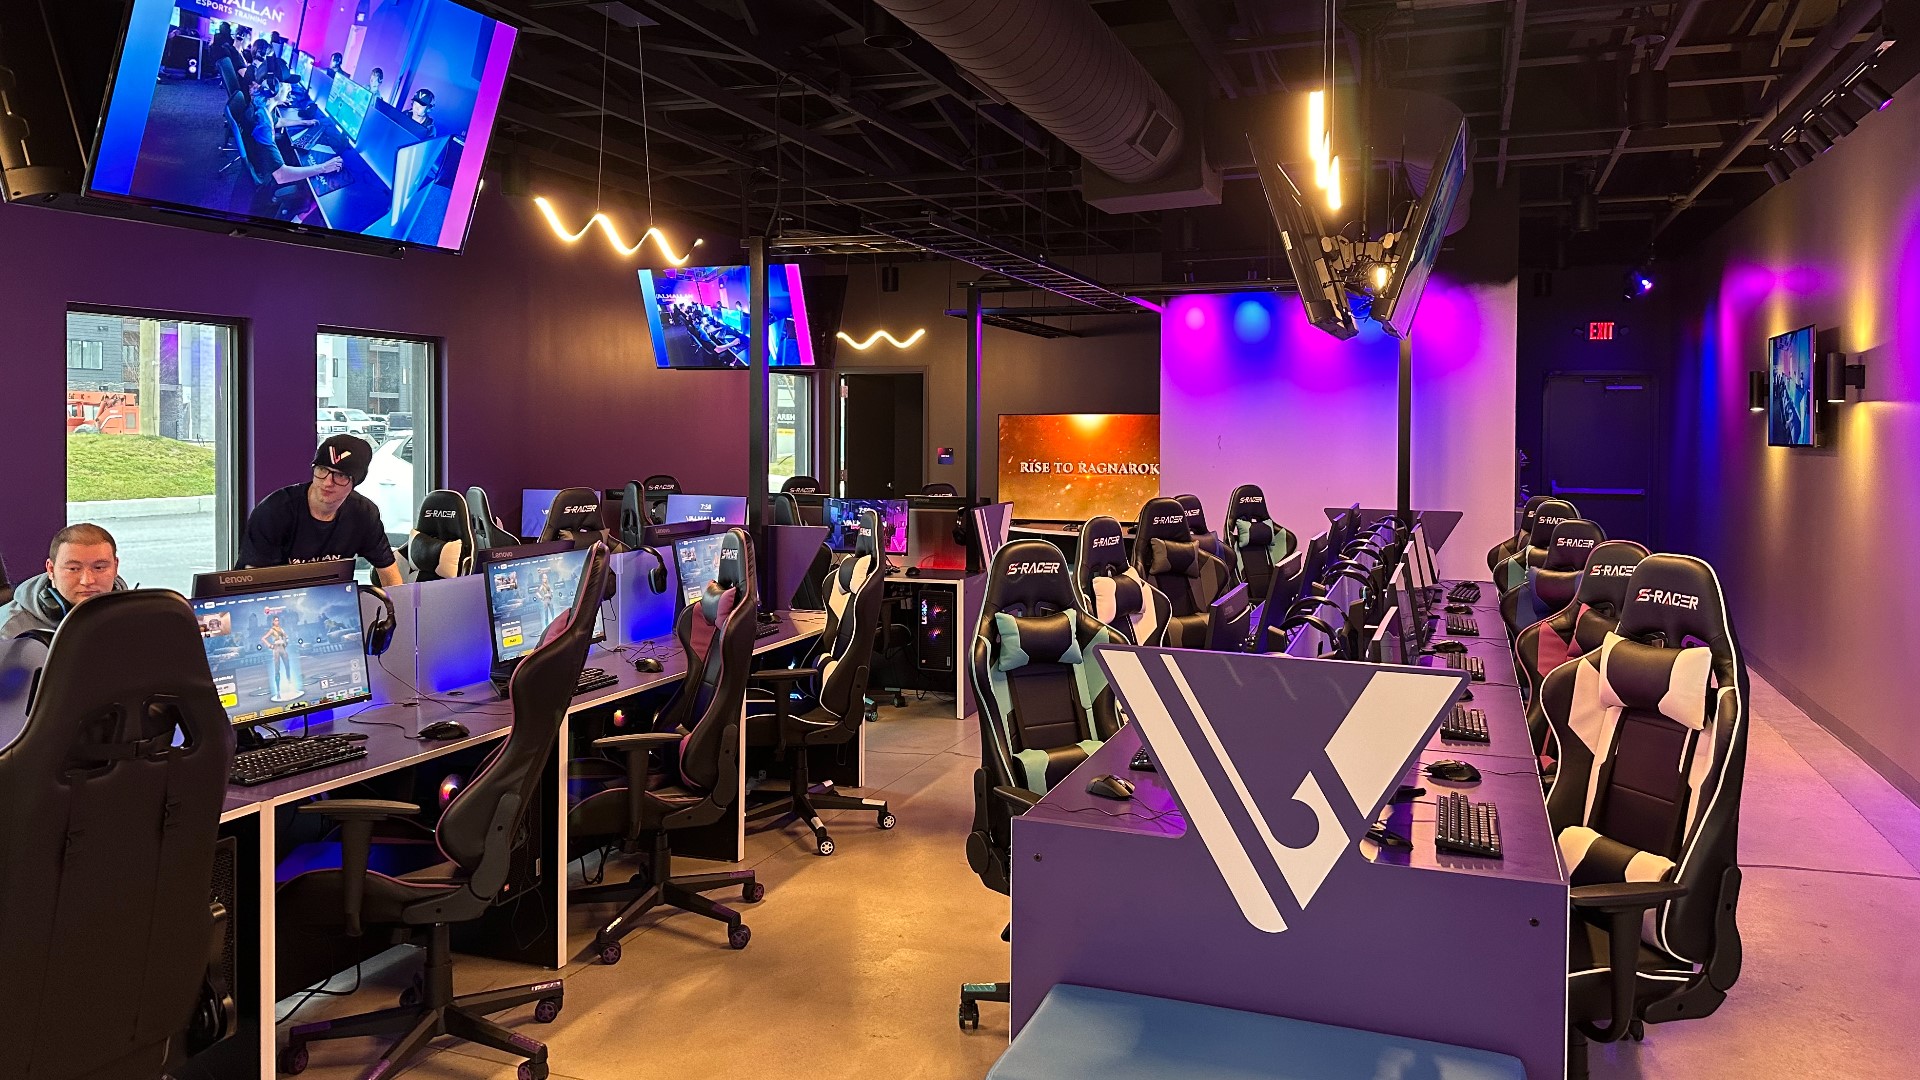 An esports training facility equipped with state-of-the-art gaming setups, ergonomic chairs, and multiple screens displaying live gameplay, providing an ideal environment for developing competitive gaming skills.